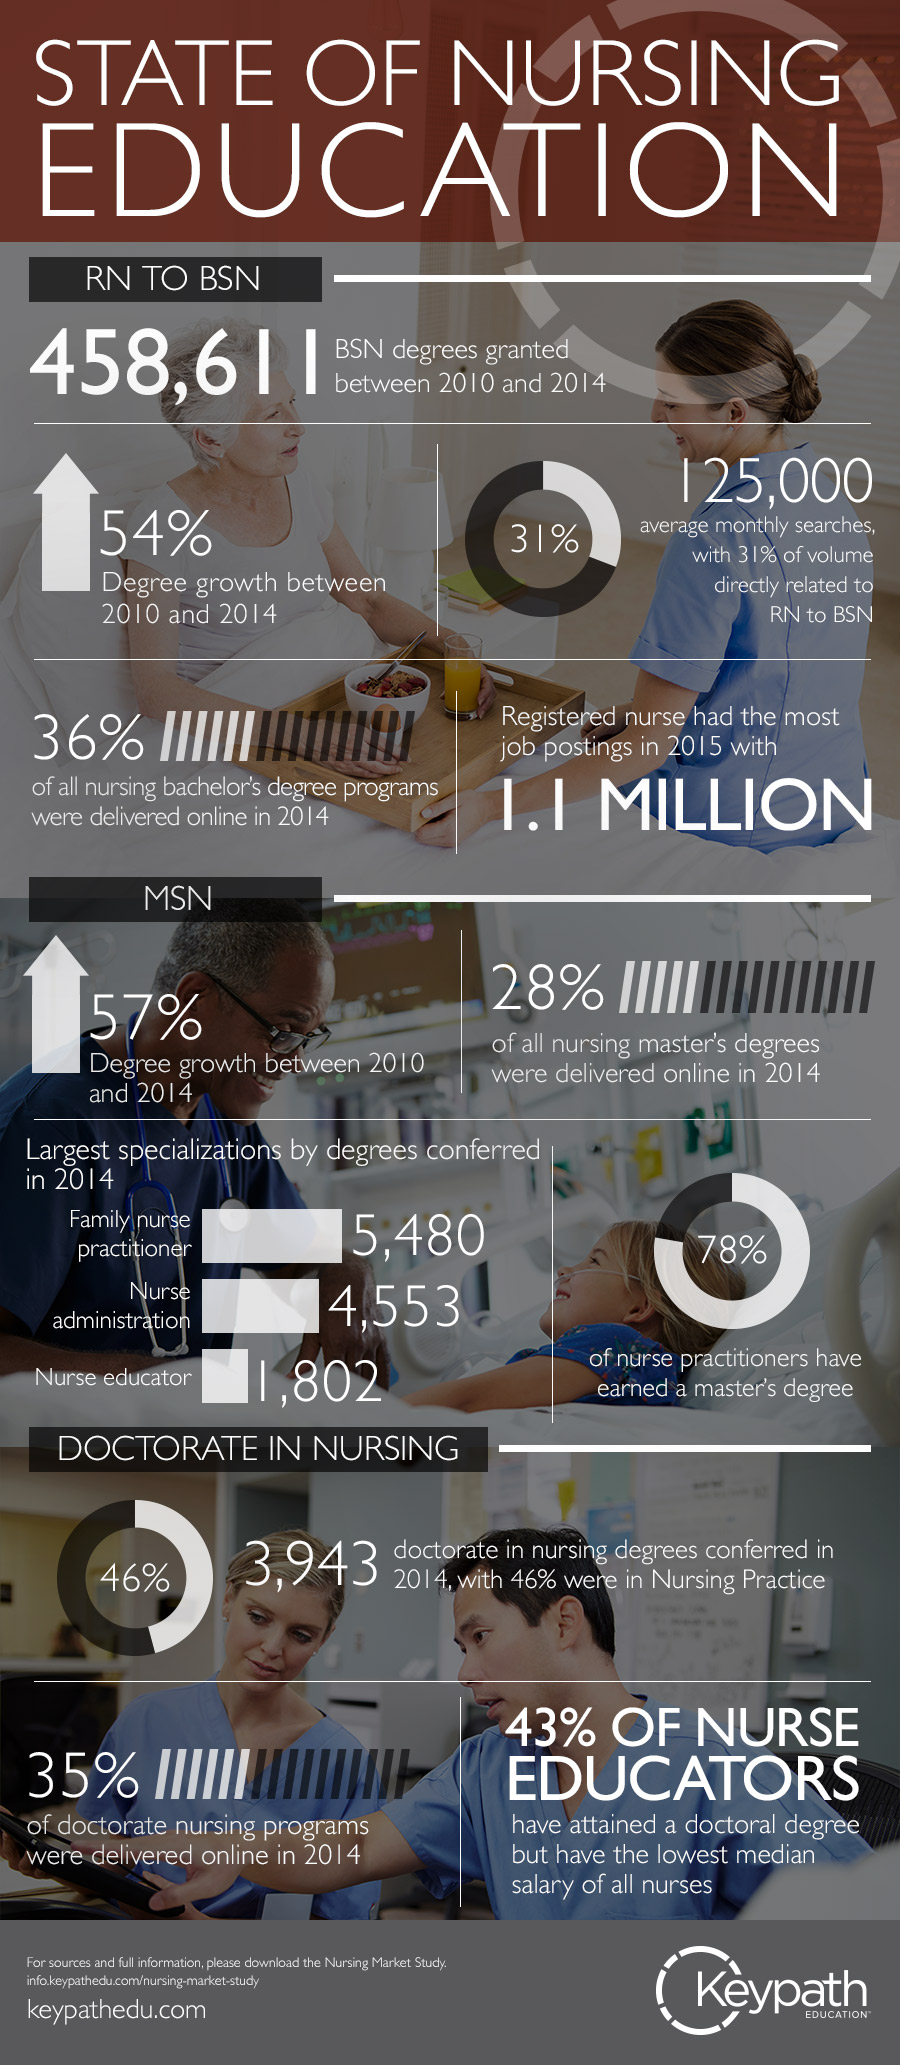 Infographic about the state of nursing education